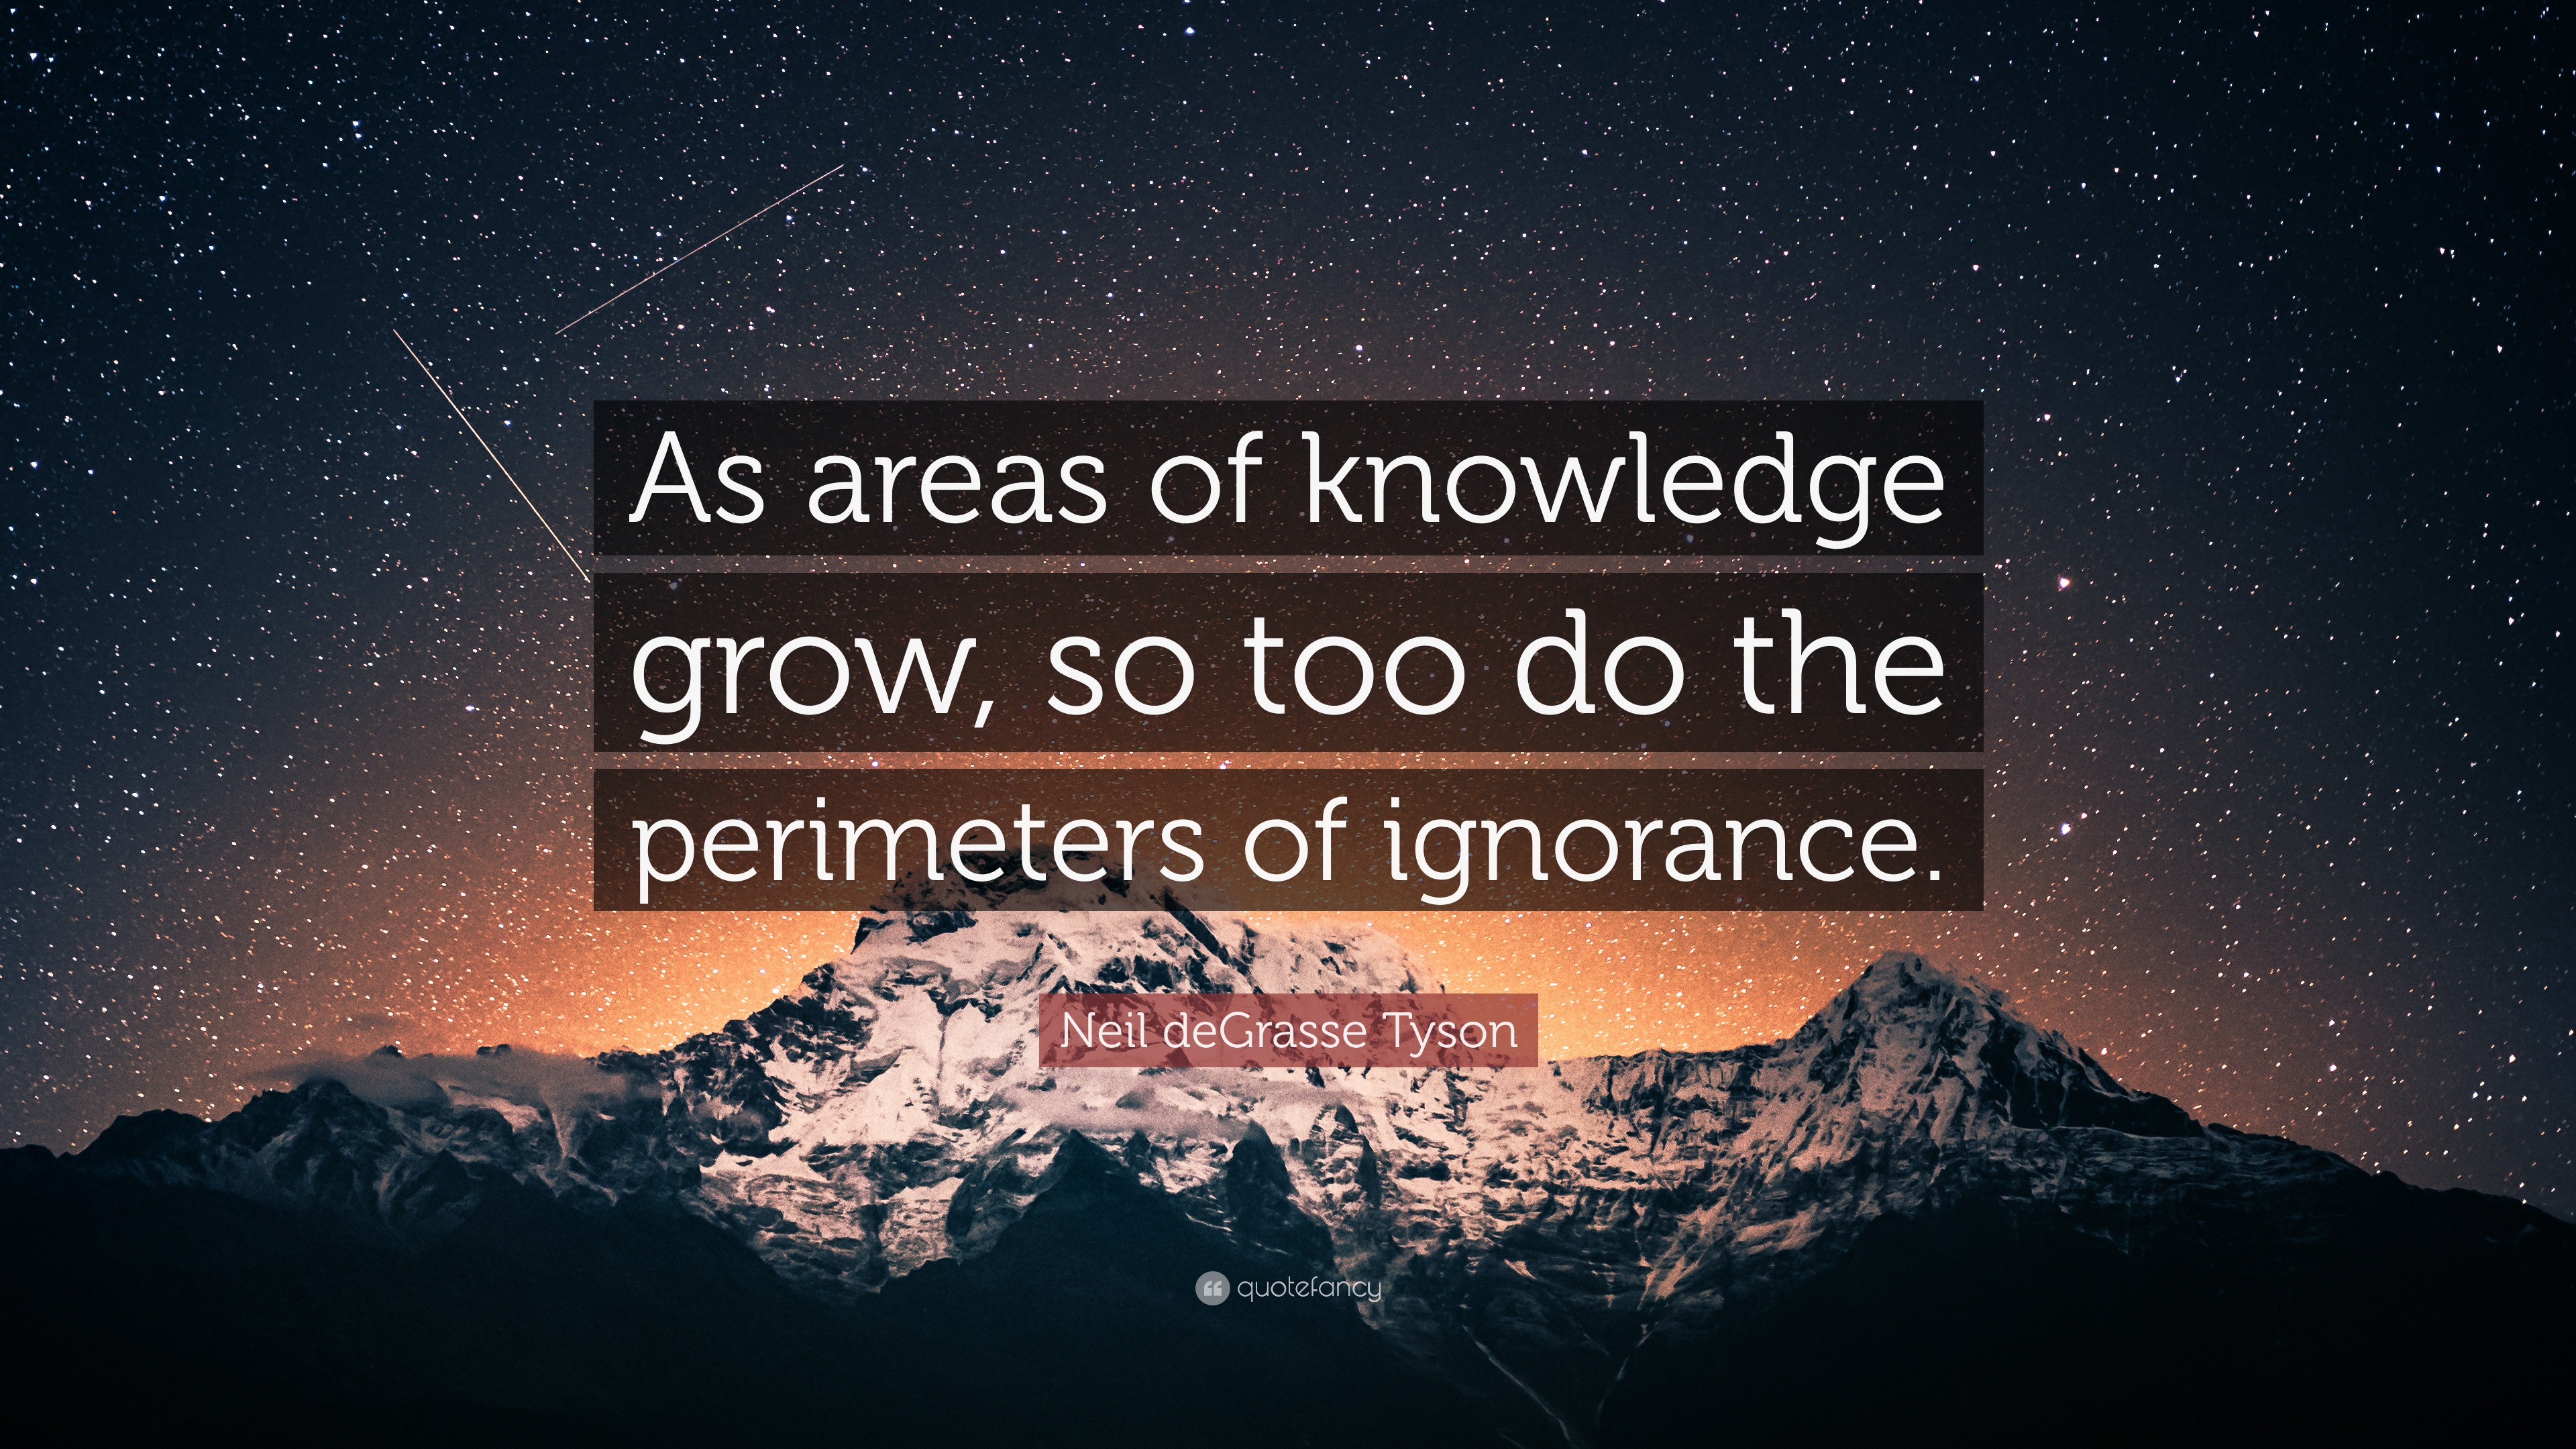 Neil deGrasse Tyson Quote “As areas of knowledge grow so too do the